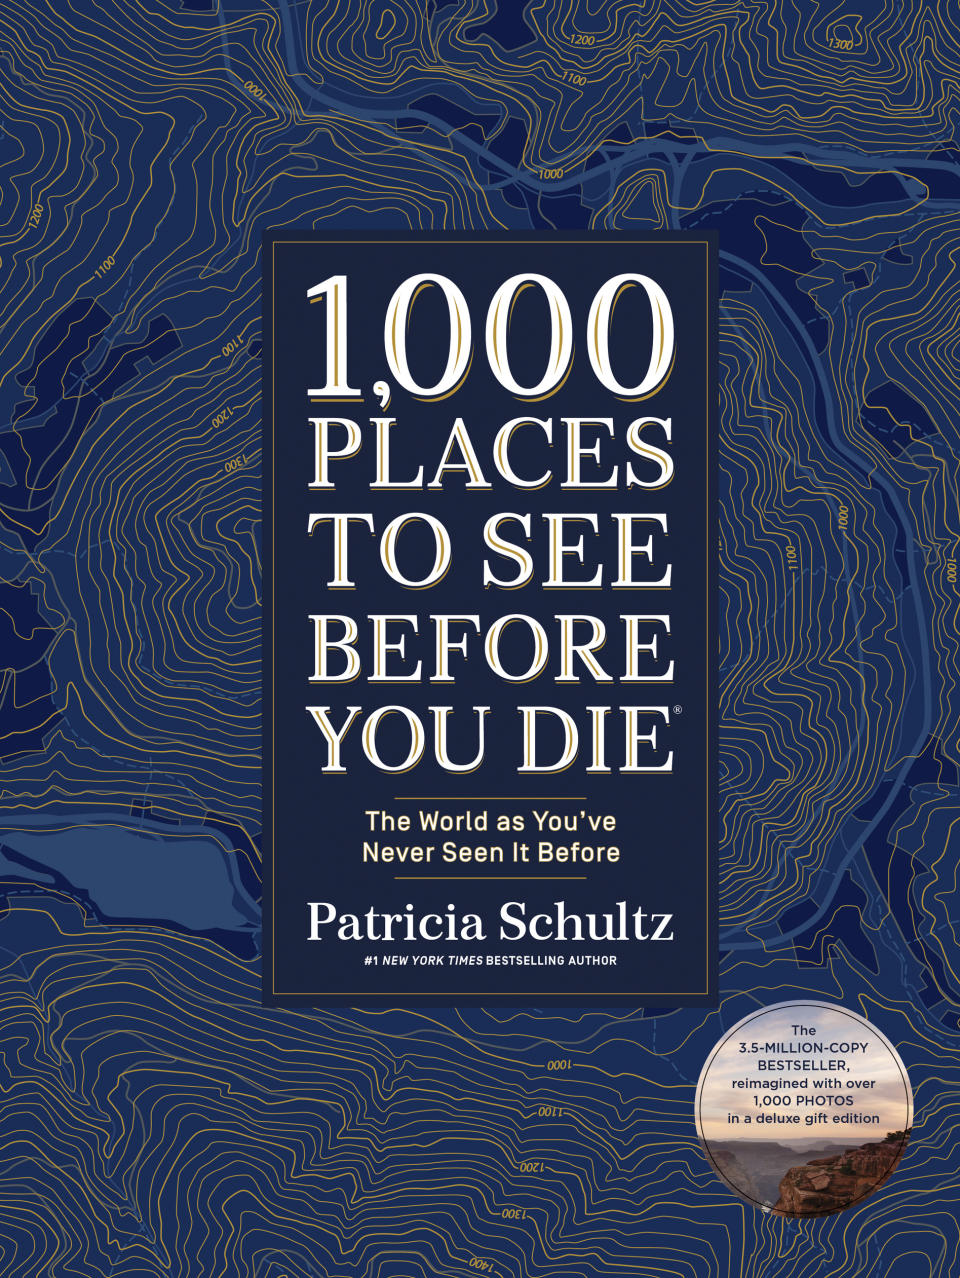 This cover image released by Artisan Books shows "1,000 Place to See Before You Die: The World as You’ve Never Seen it Before,” by Patricia Schultz. (Artisan Books via AP)